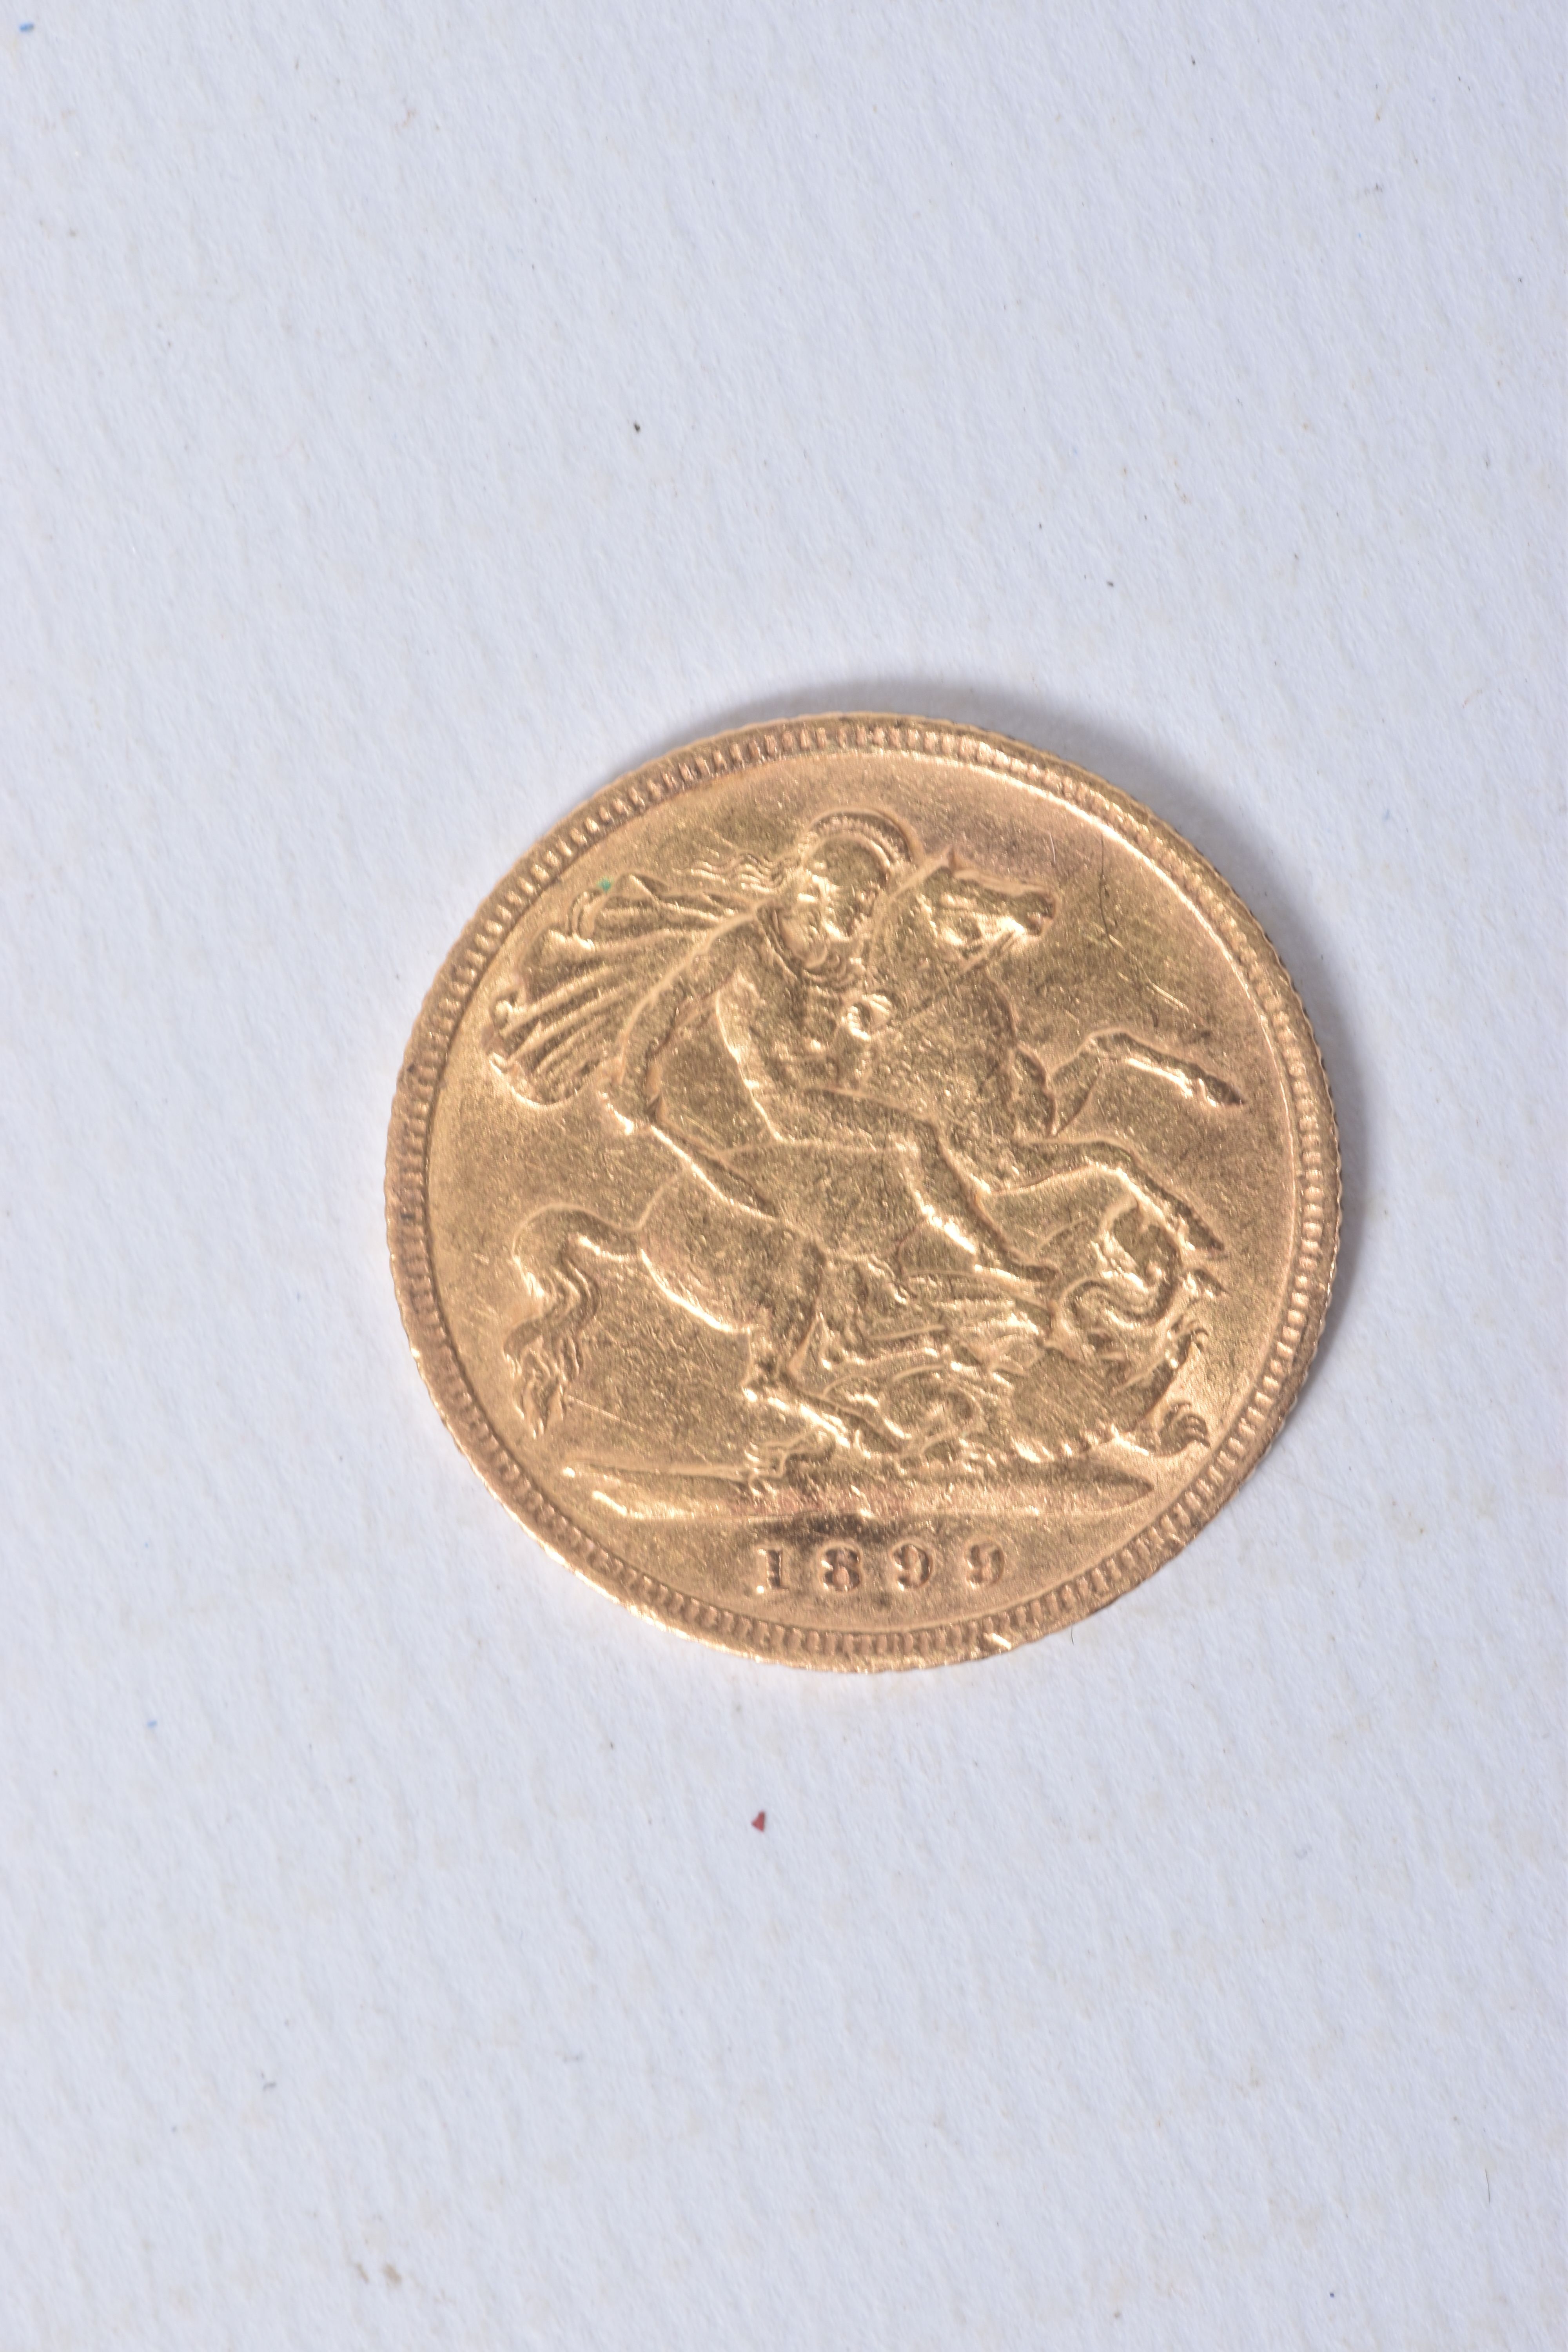 A HALF SOVEREIGN COIN, depicting Queen Victoria, dated 1899, approximate gross weight 4.1 grams - Image 2 of 2